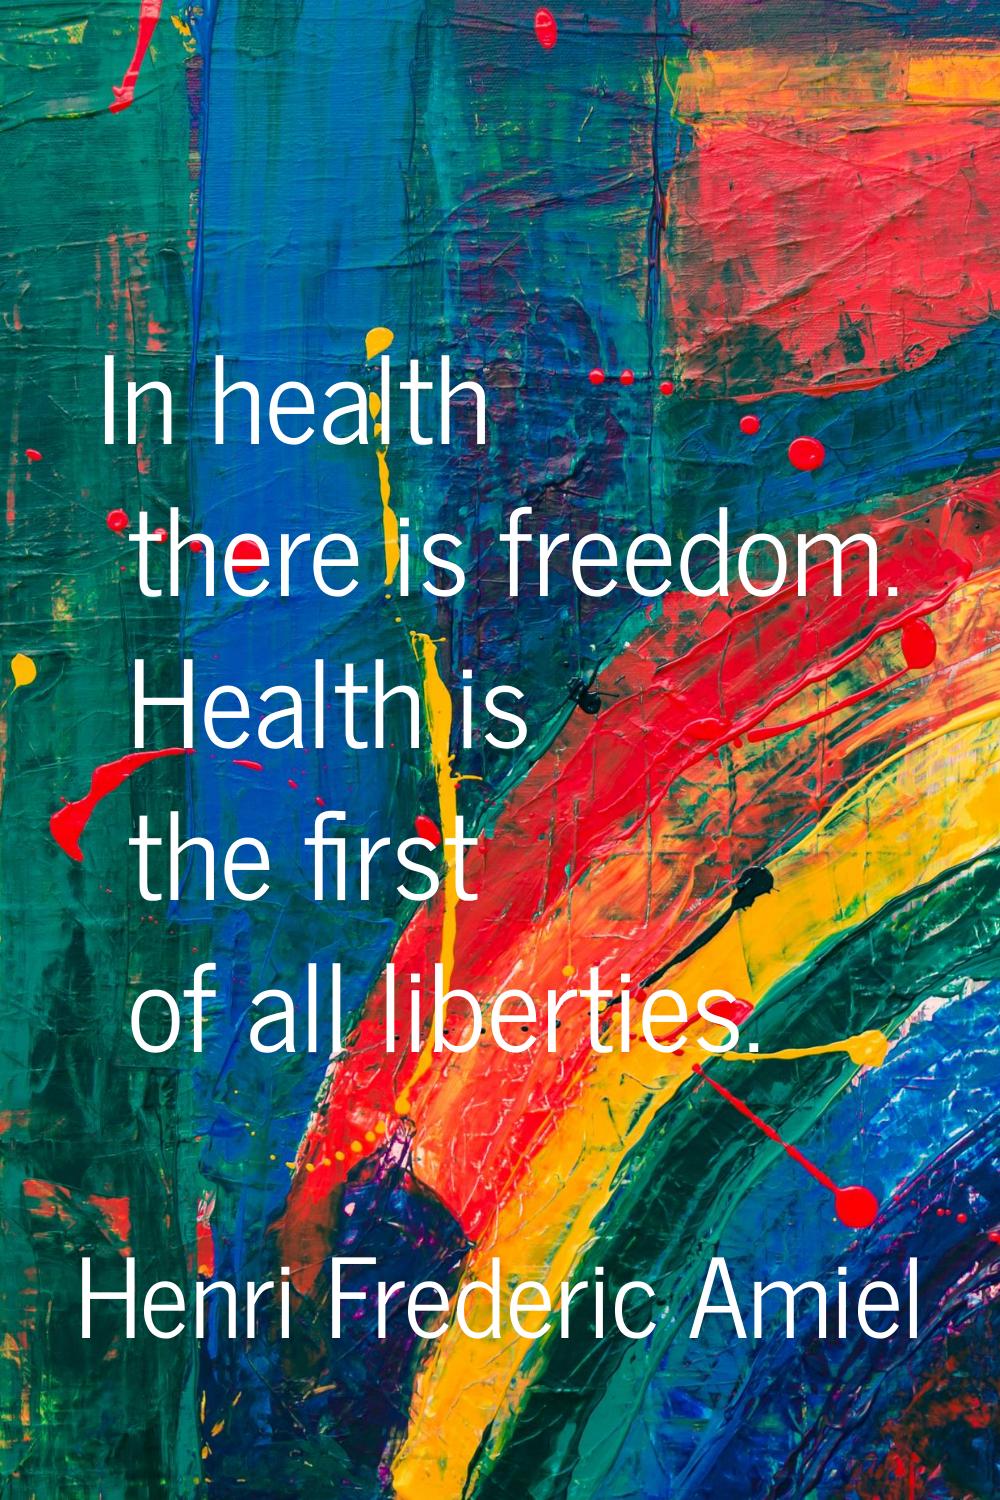 In health there is freedom. Health is the first of all liberties.